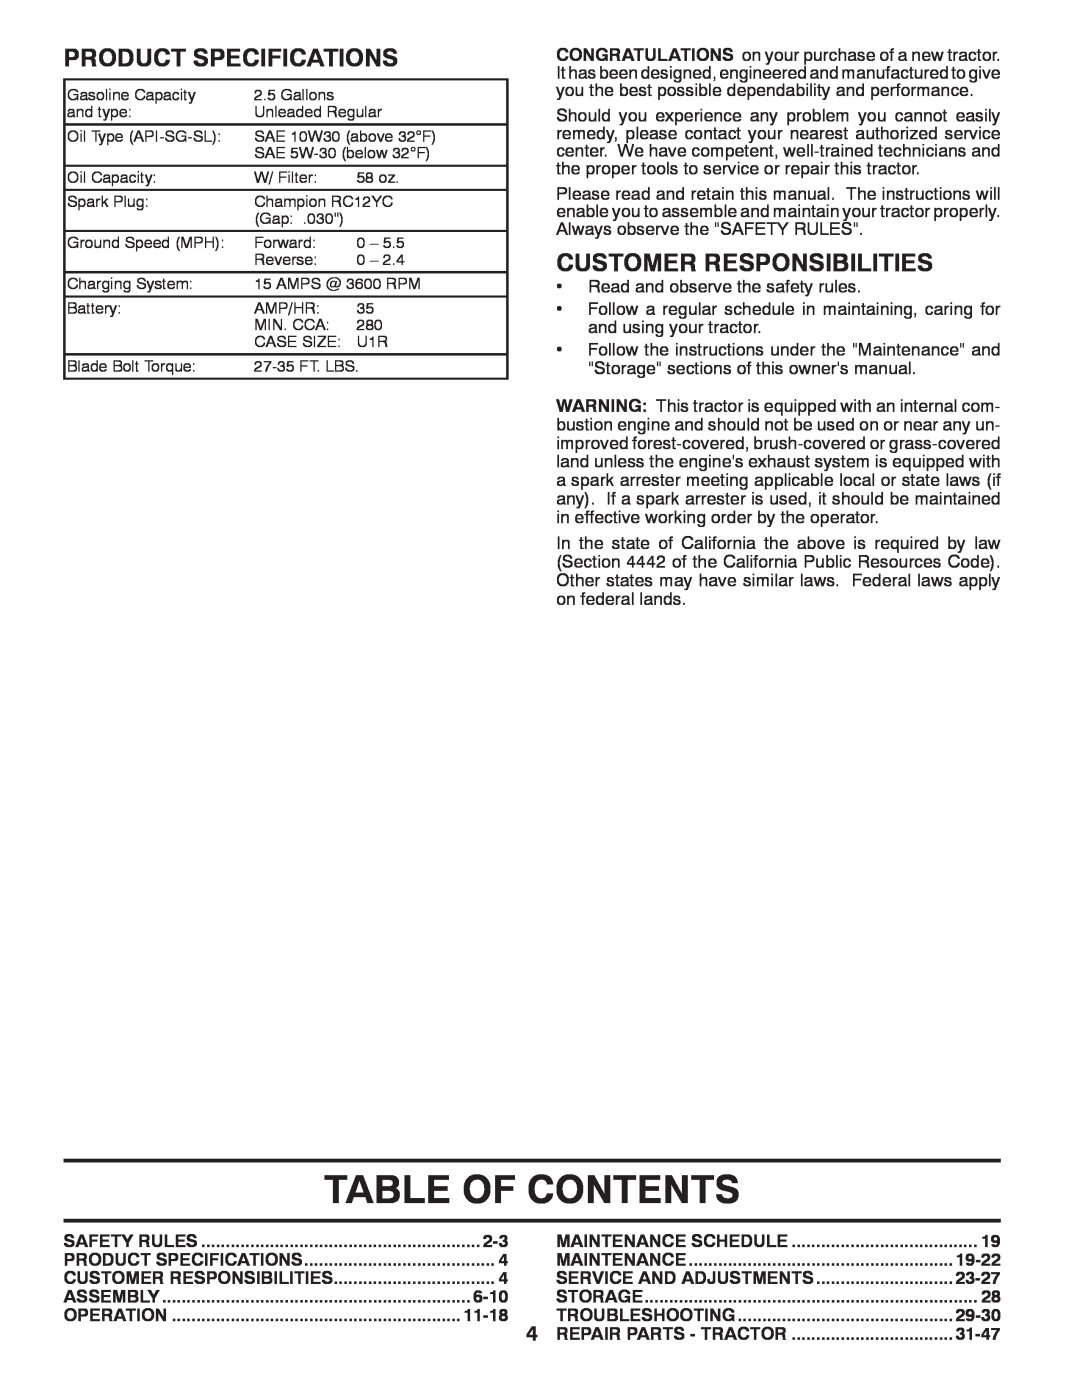 Husqvarna CTH2036 owner manual Table Of Contents, Product Specifications, Customer Responsibilities 